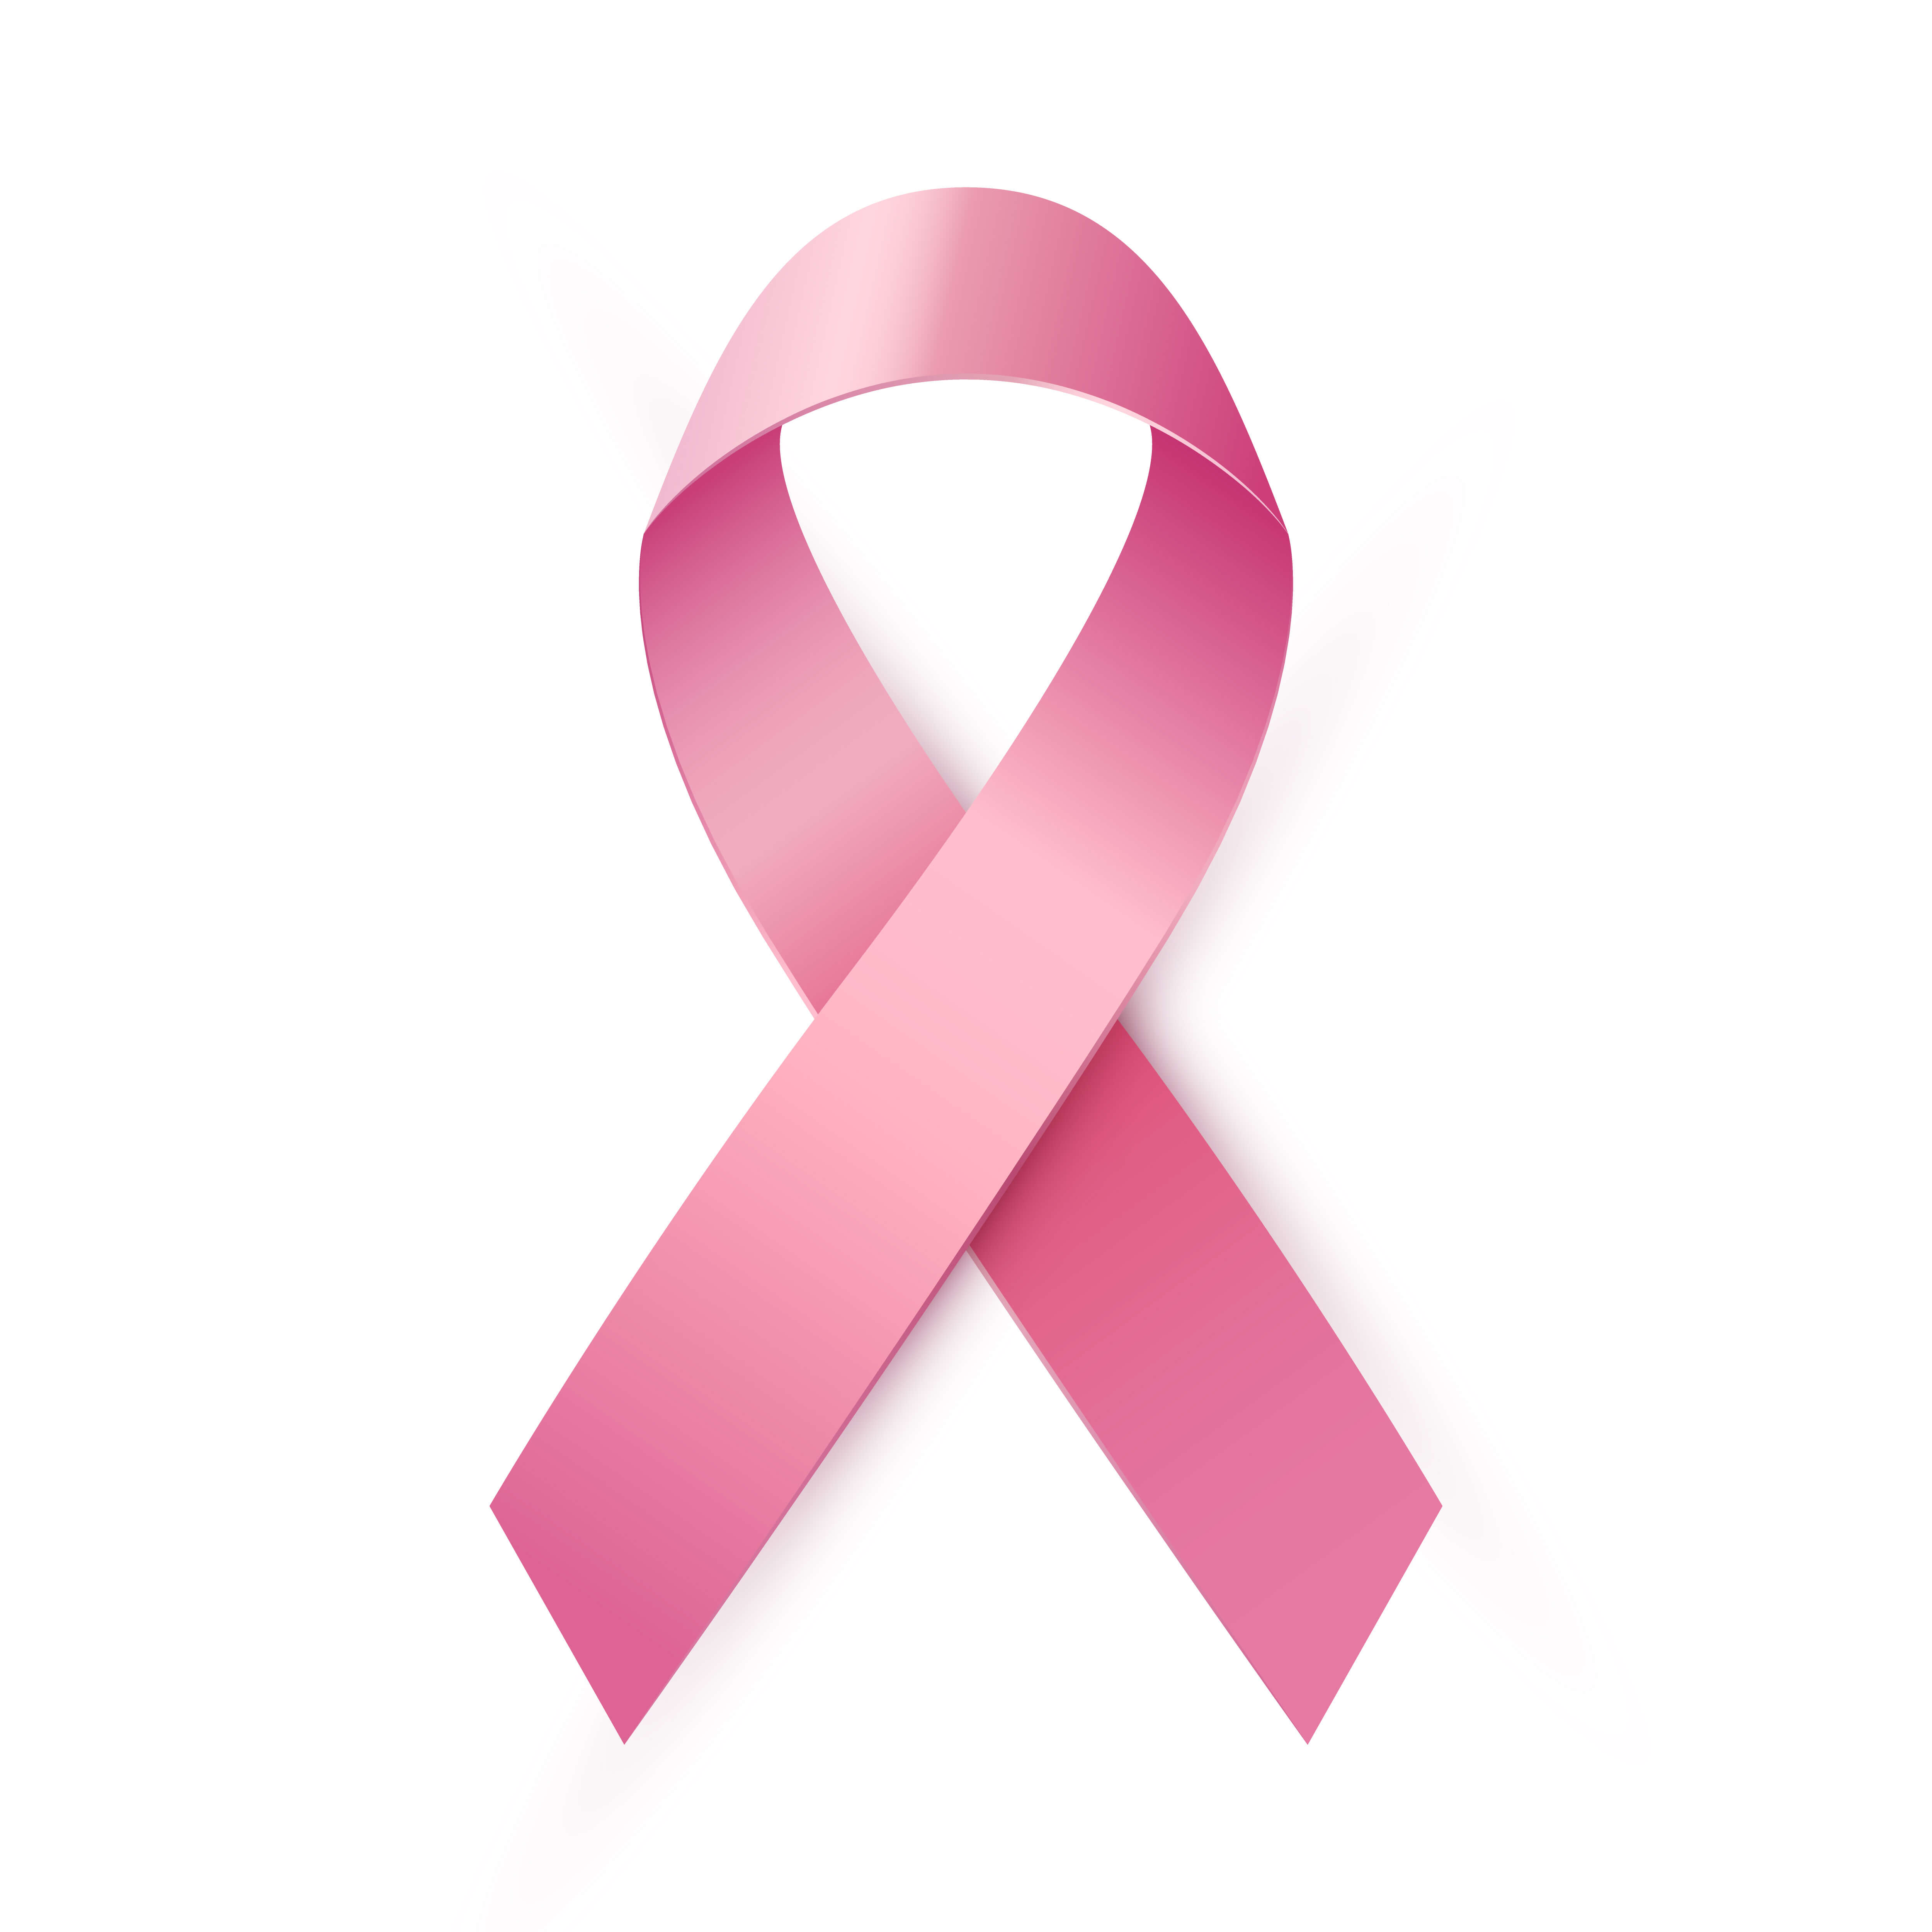 The Origin of the Pink Ribbon